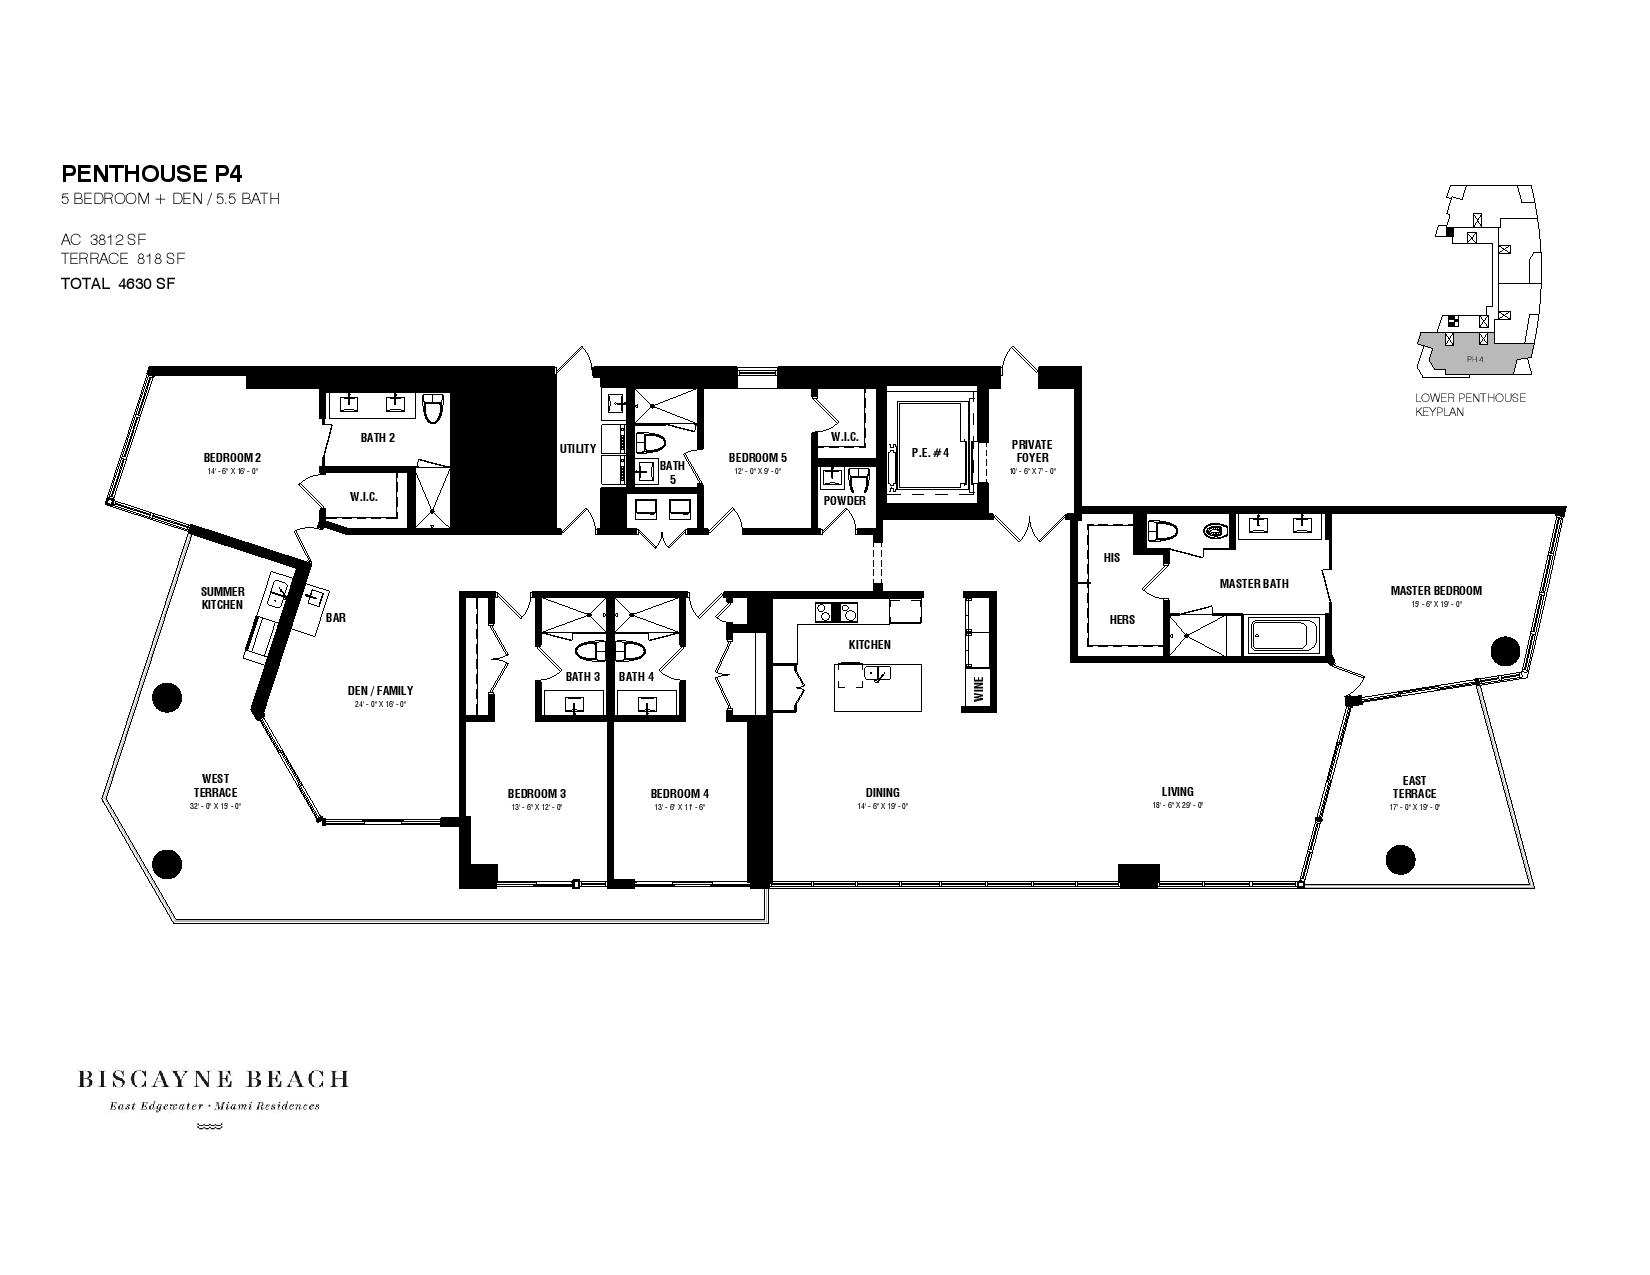 Biscayne Beach Penthouse Residence P4